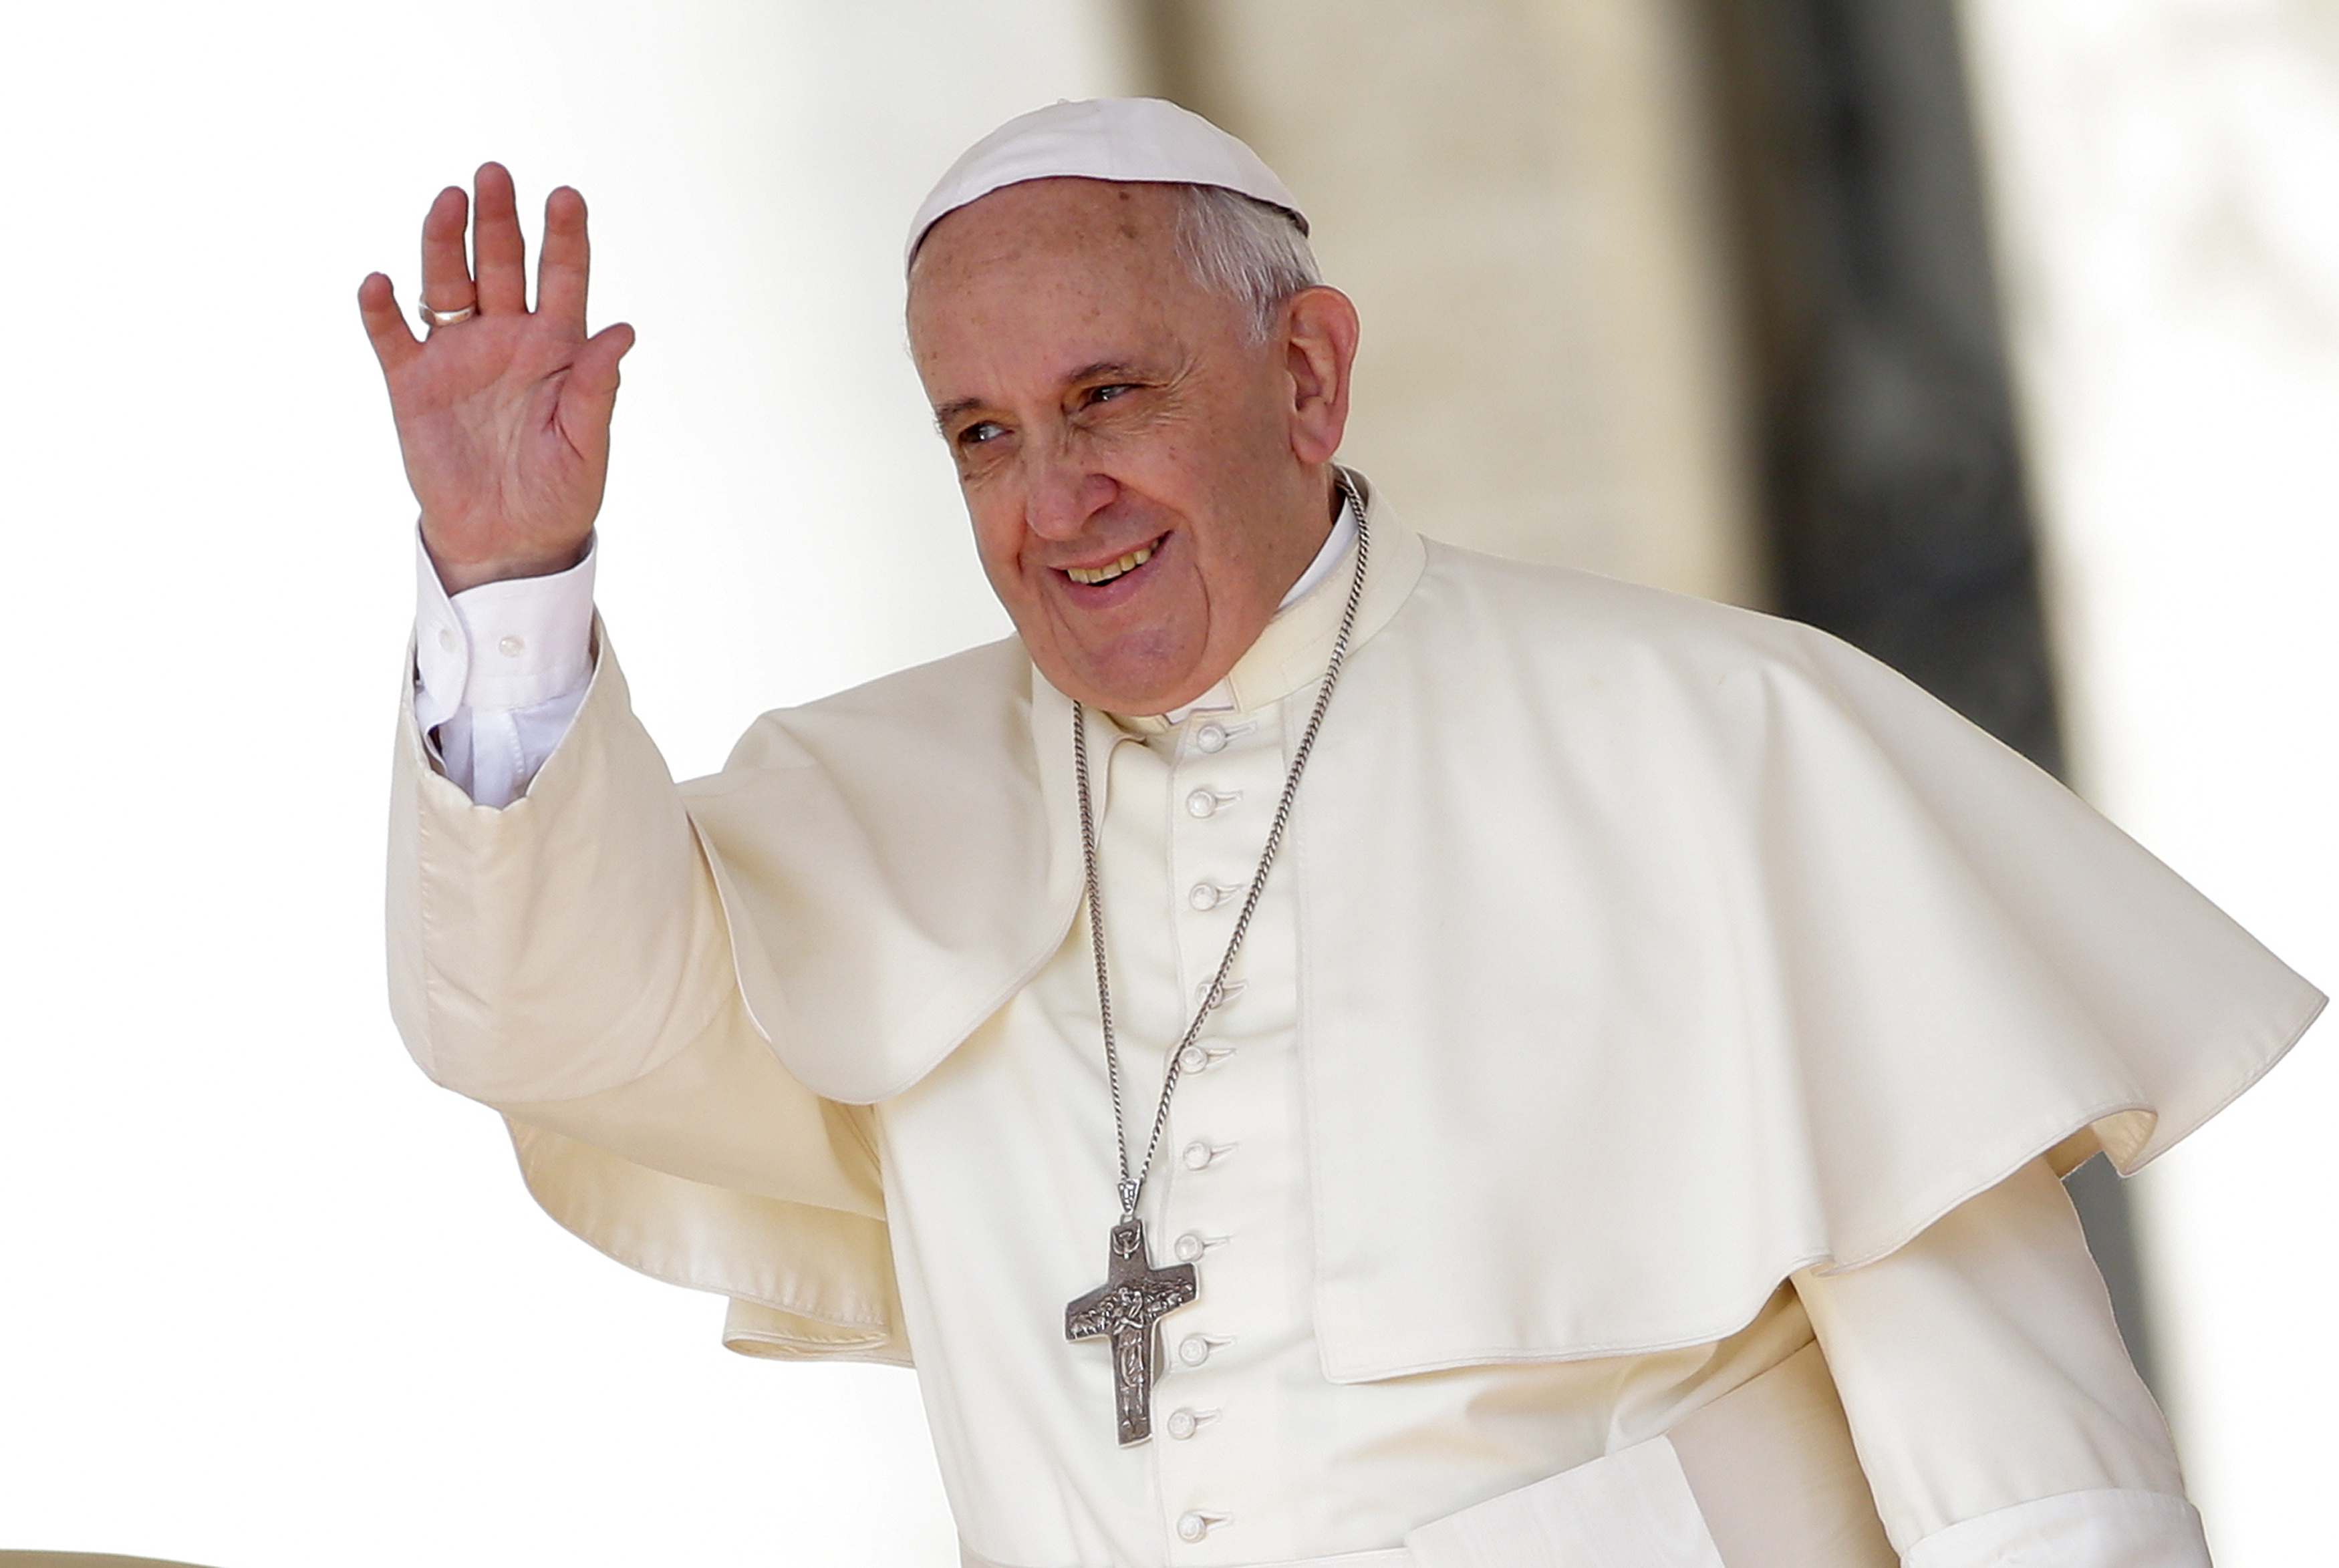 POPE FRANCIS REFORMS CATHOLIC LAWS: MEMBERS TO DIVORCE, REMARRY WITHIN THE CHURCH